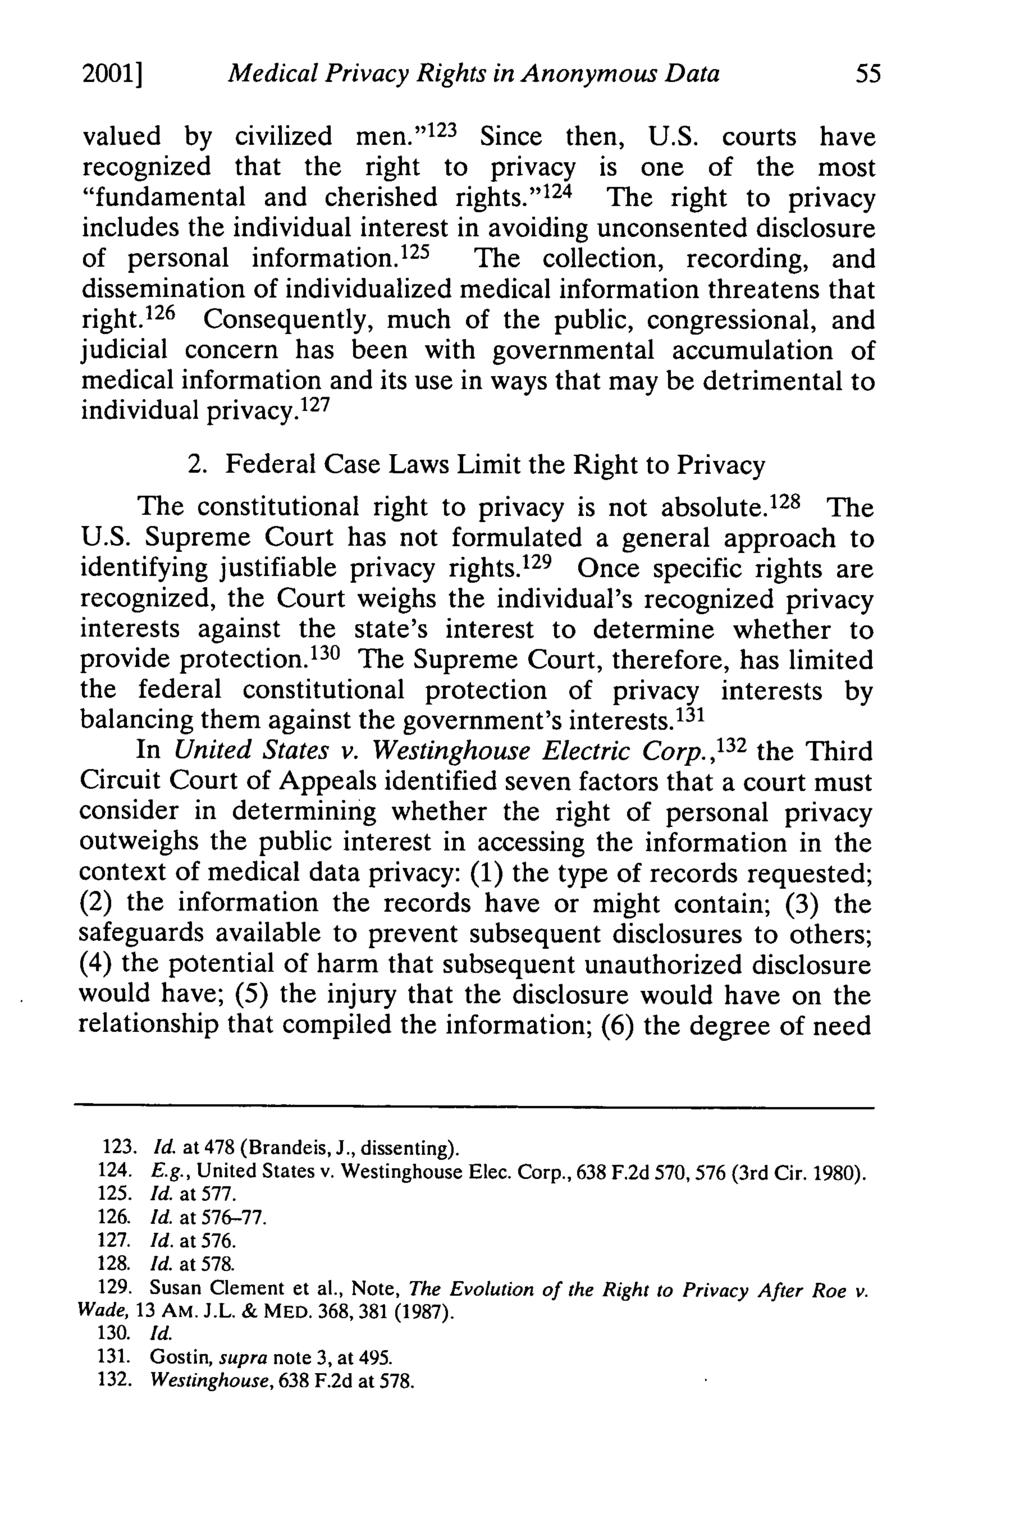 2001] Medical Privacy Rights in Anonymous Data valued by civilized men." 123 Since then, U.S. courts have recognized that the right to privacy is one of the most "fundamental and cherished rights.